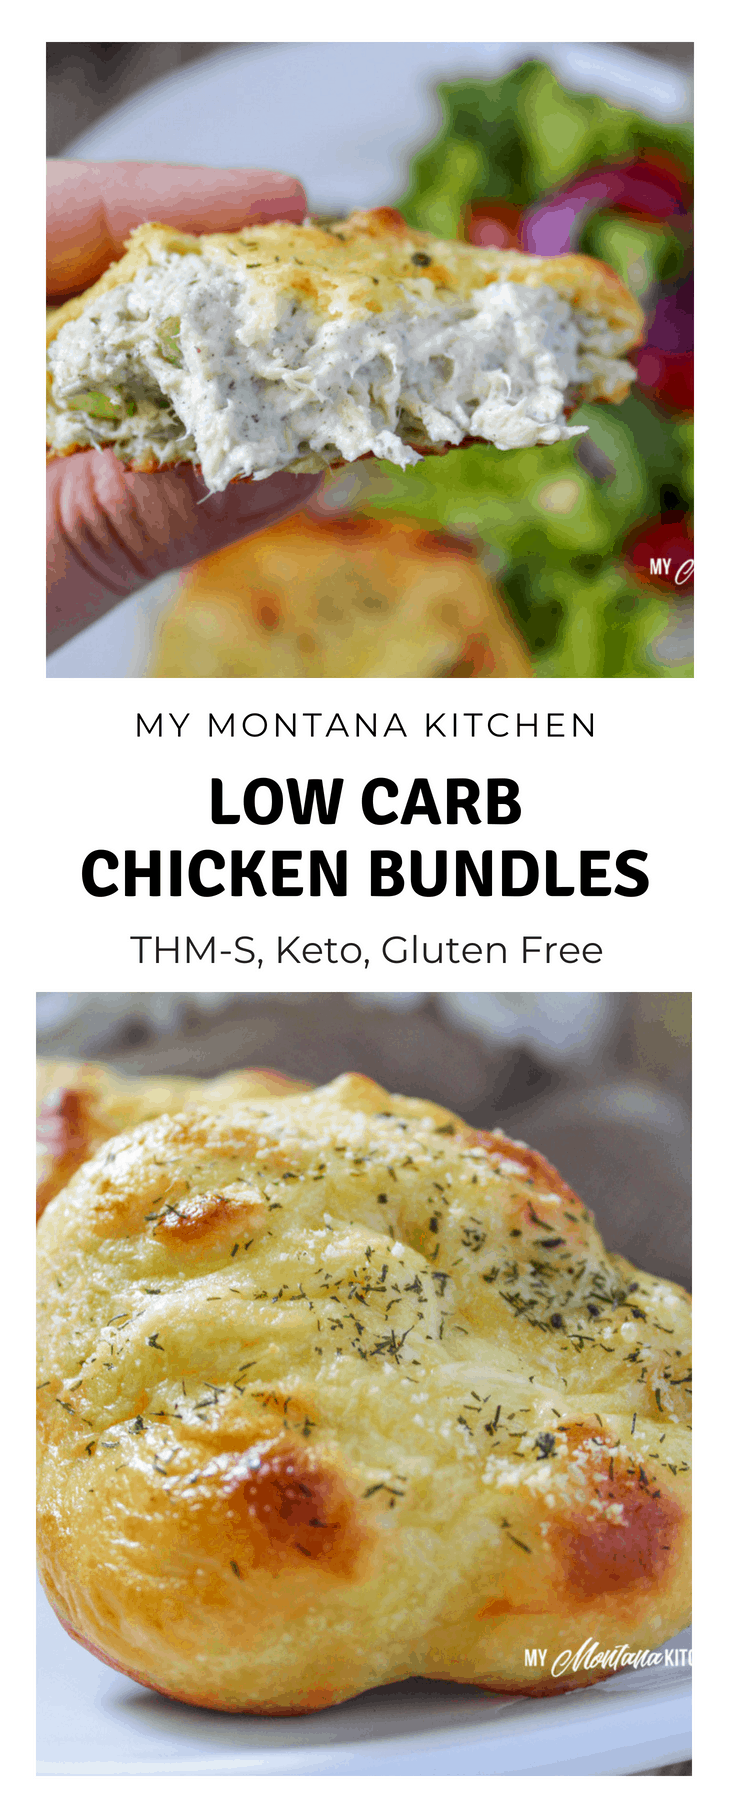 These creamy, low carb chicken bundles are made with cream cheese, chicken, and a pop of dill and then wrapped in mozzarella dough and baked to golden perfection. This easy recipe makes a perfect low carb or kept dinner. #trimhealthymama #thm #thms #lowcarb #keto #mozzarelladough #chickenbundles #dinnerideas #mymontanakitchen #healthydinner